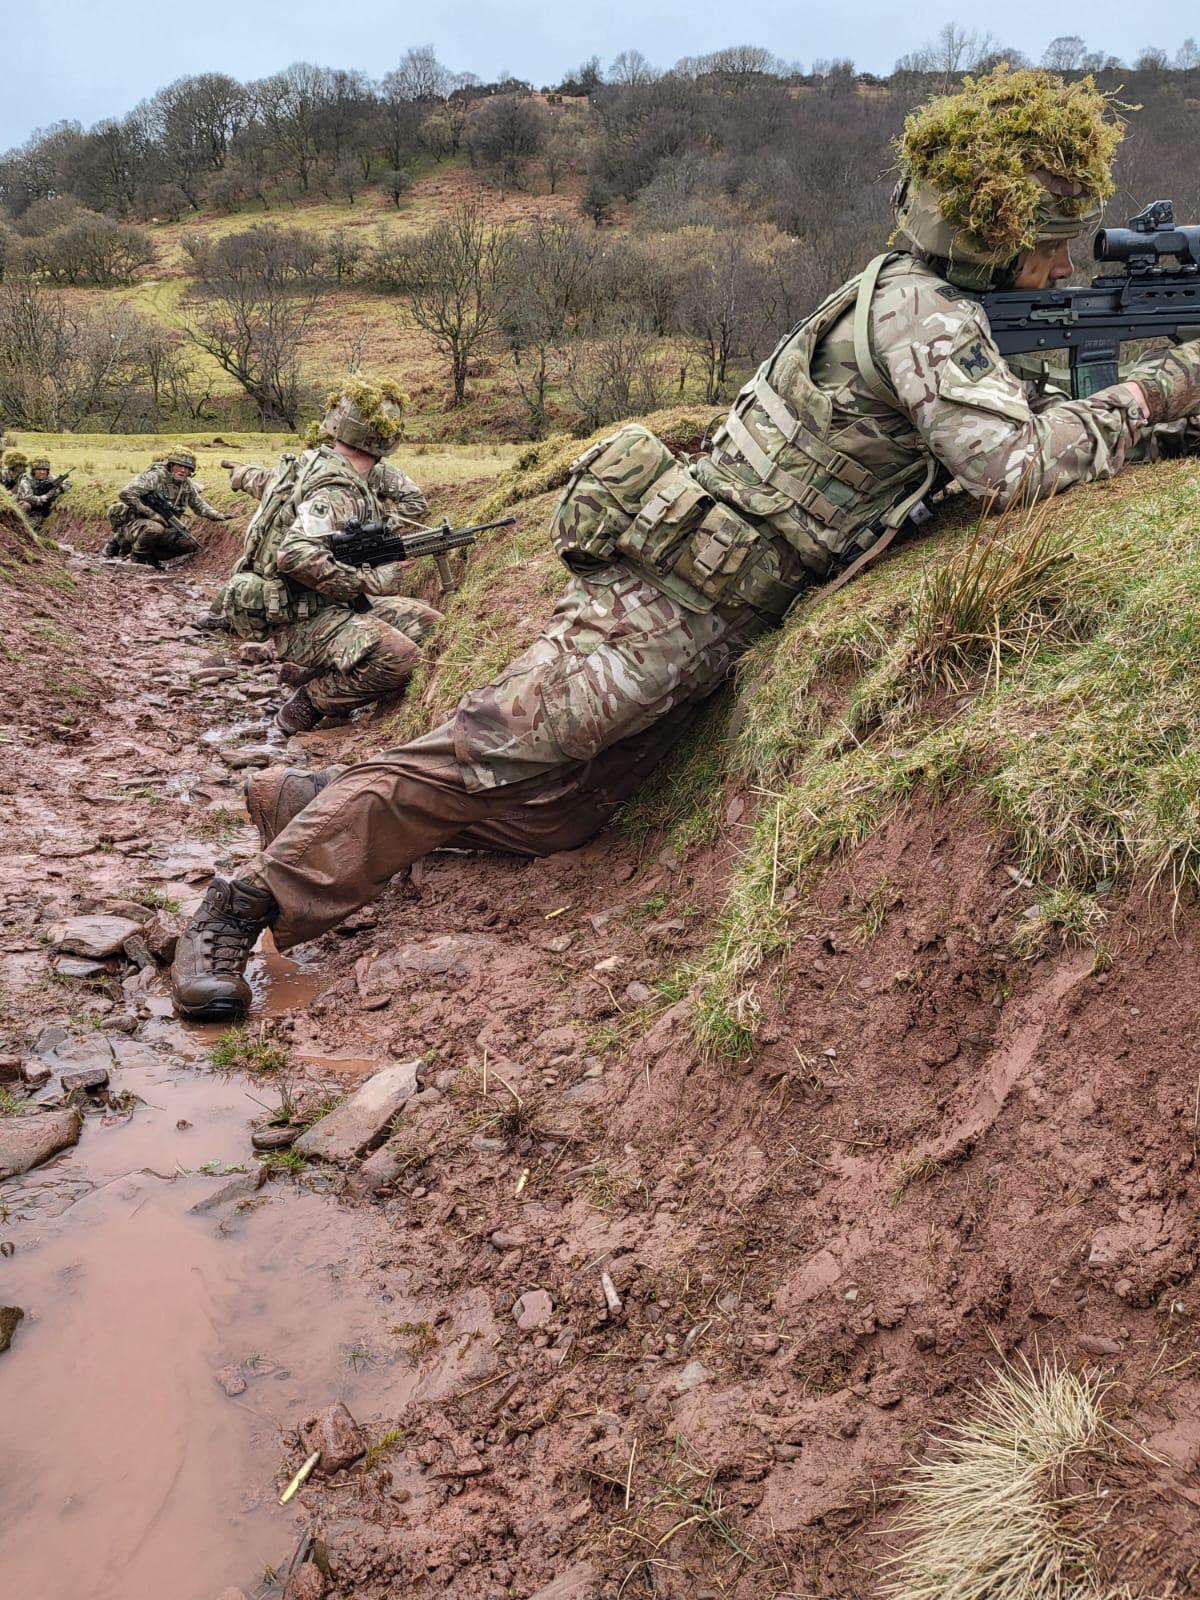 Personnel crouch in muddy river trench, with rifles.